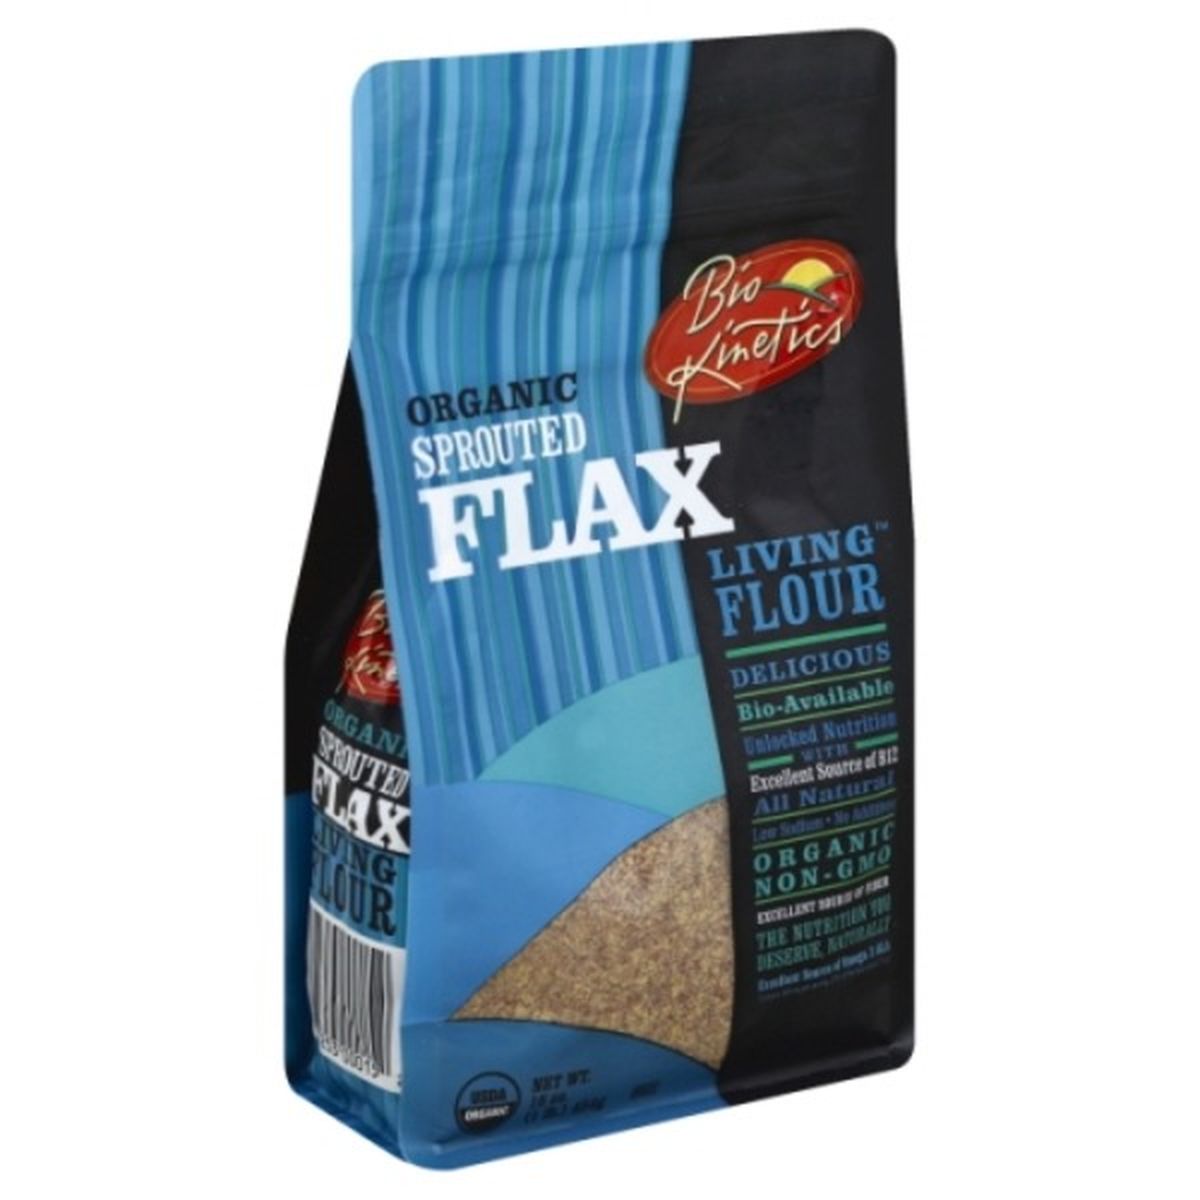 Calories in Bio-Kinetics Flour, Living, Organic, Sprouted  Flax